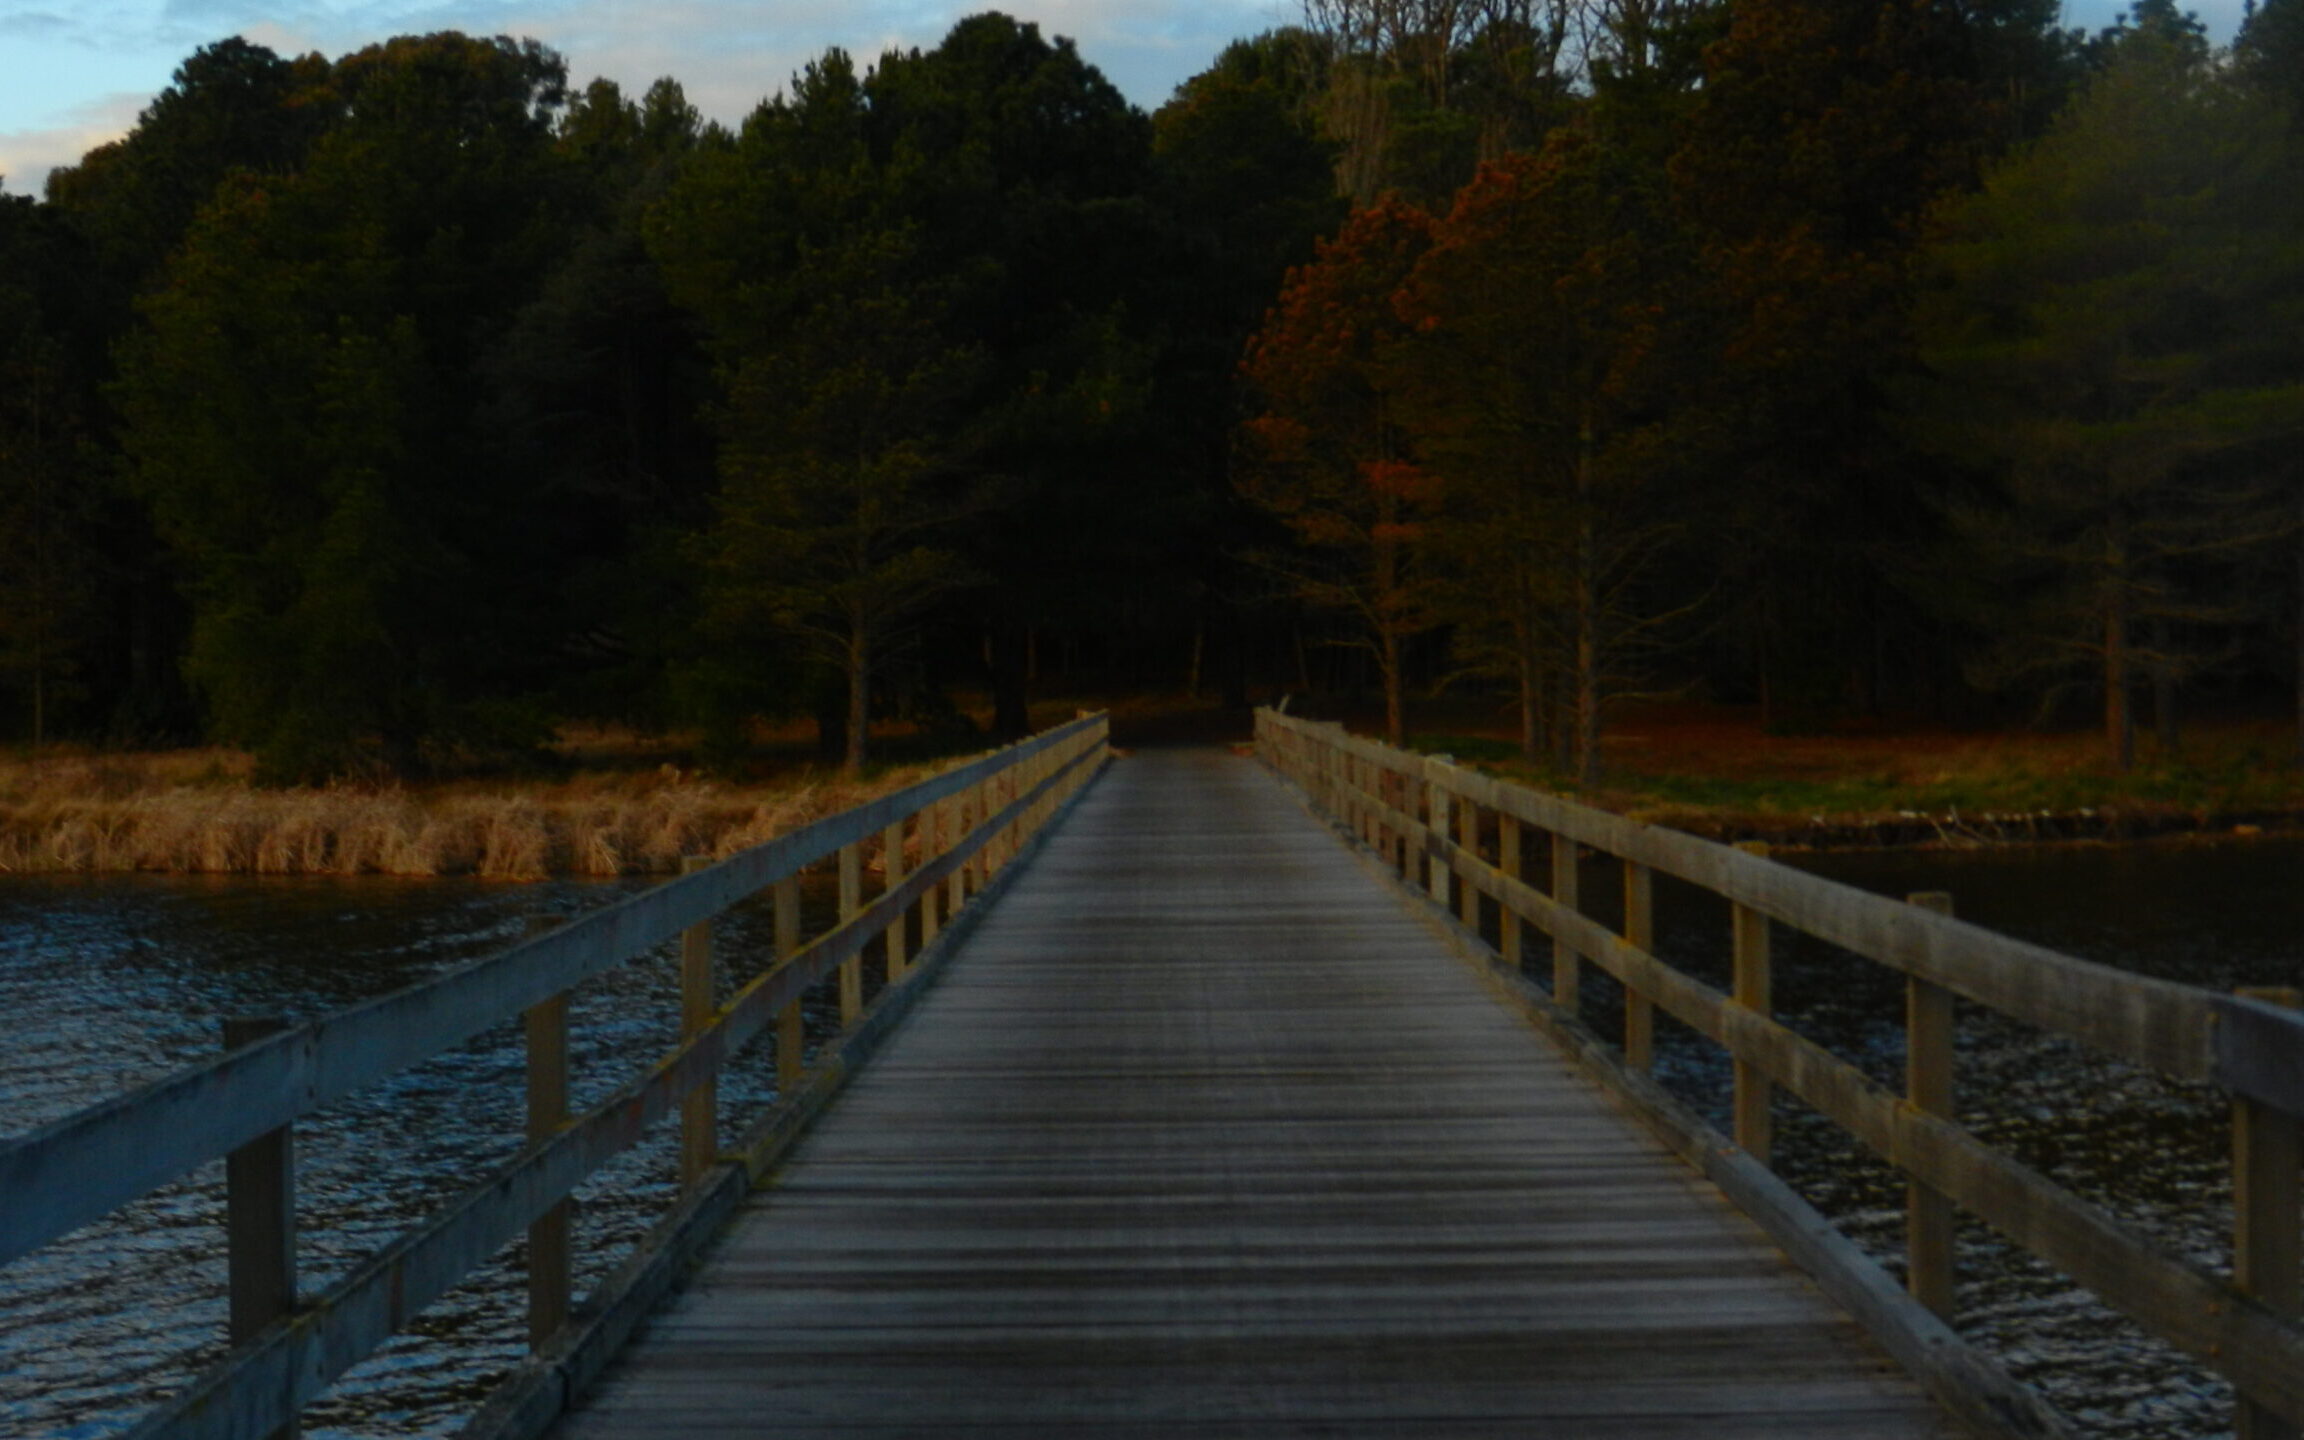 wooden bridge at dawn over lake, greens on the other side